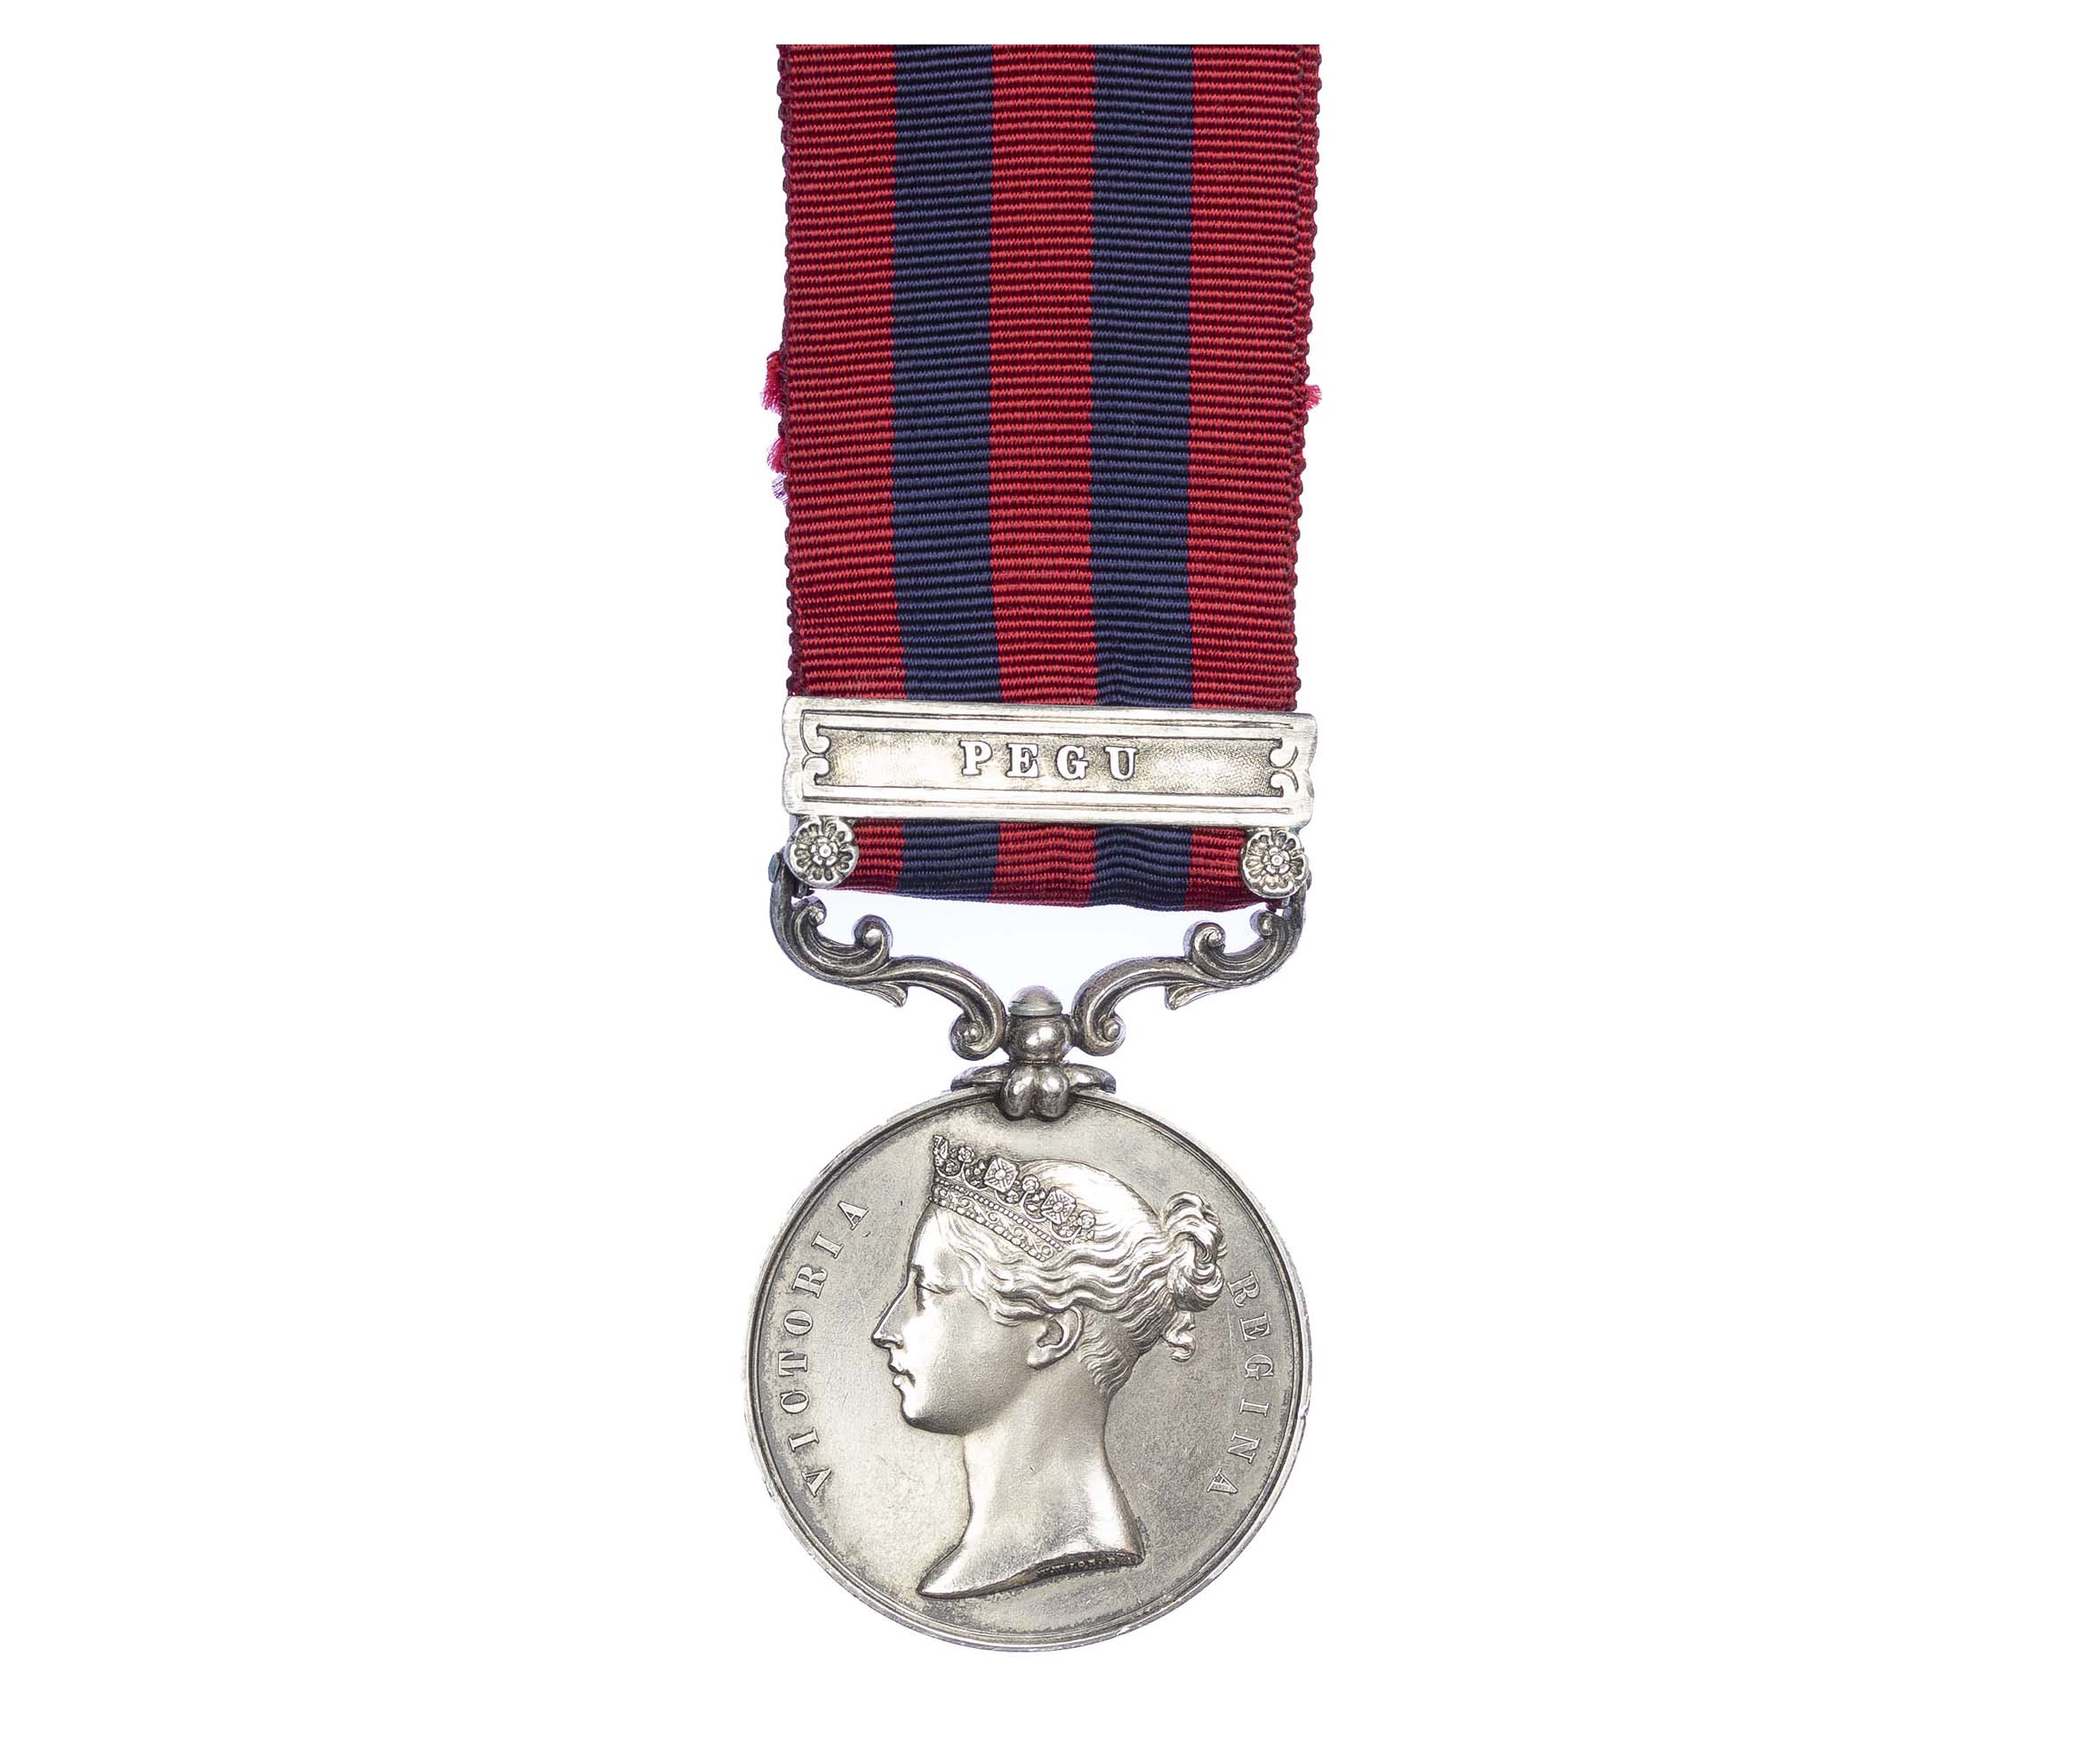 India General Service Medal 1854-95 One clasp, Pegu, to 2nd Class Carpenter James McEvoy